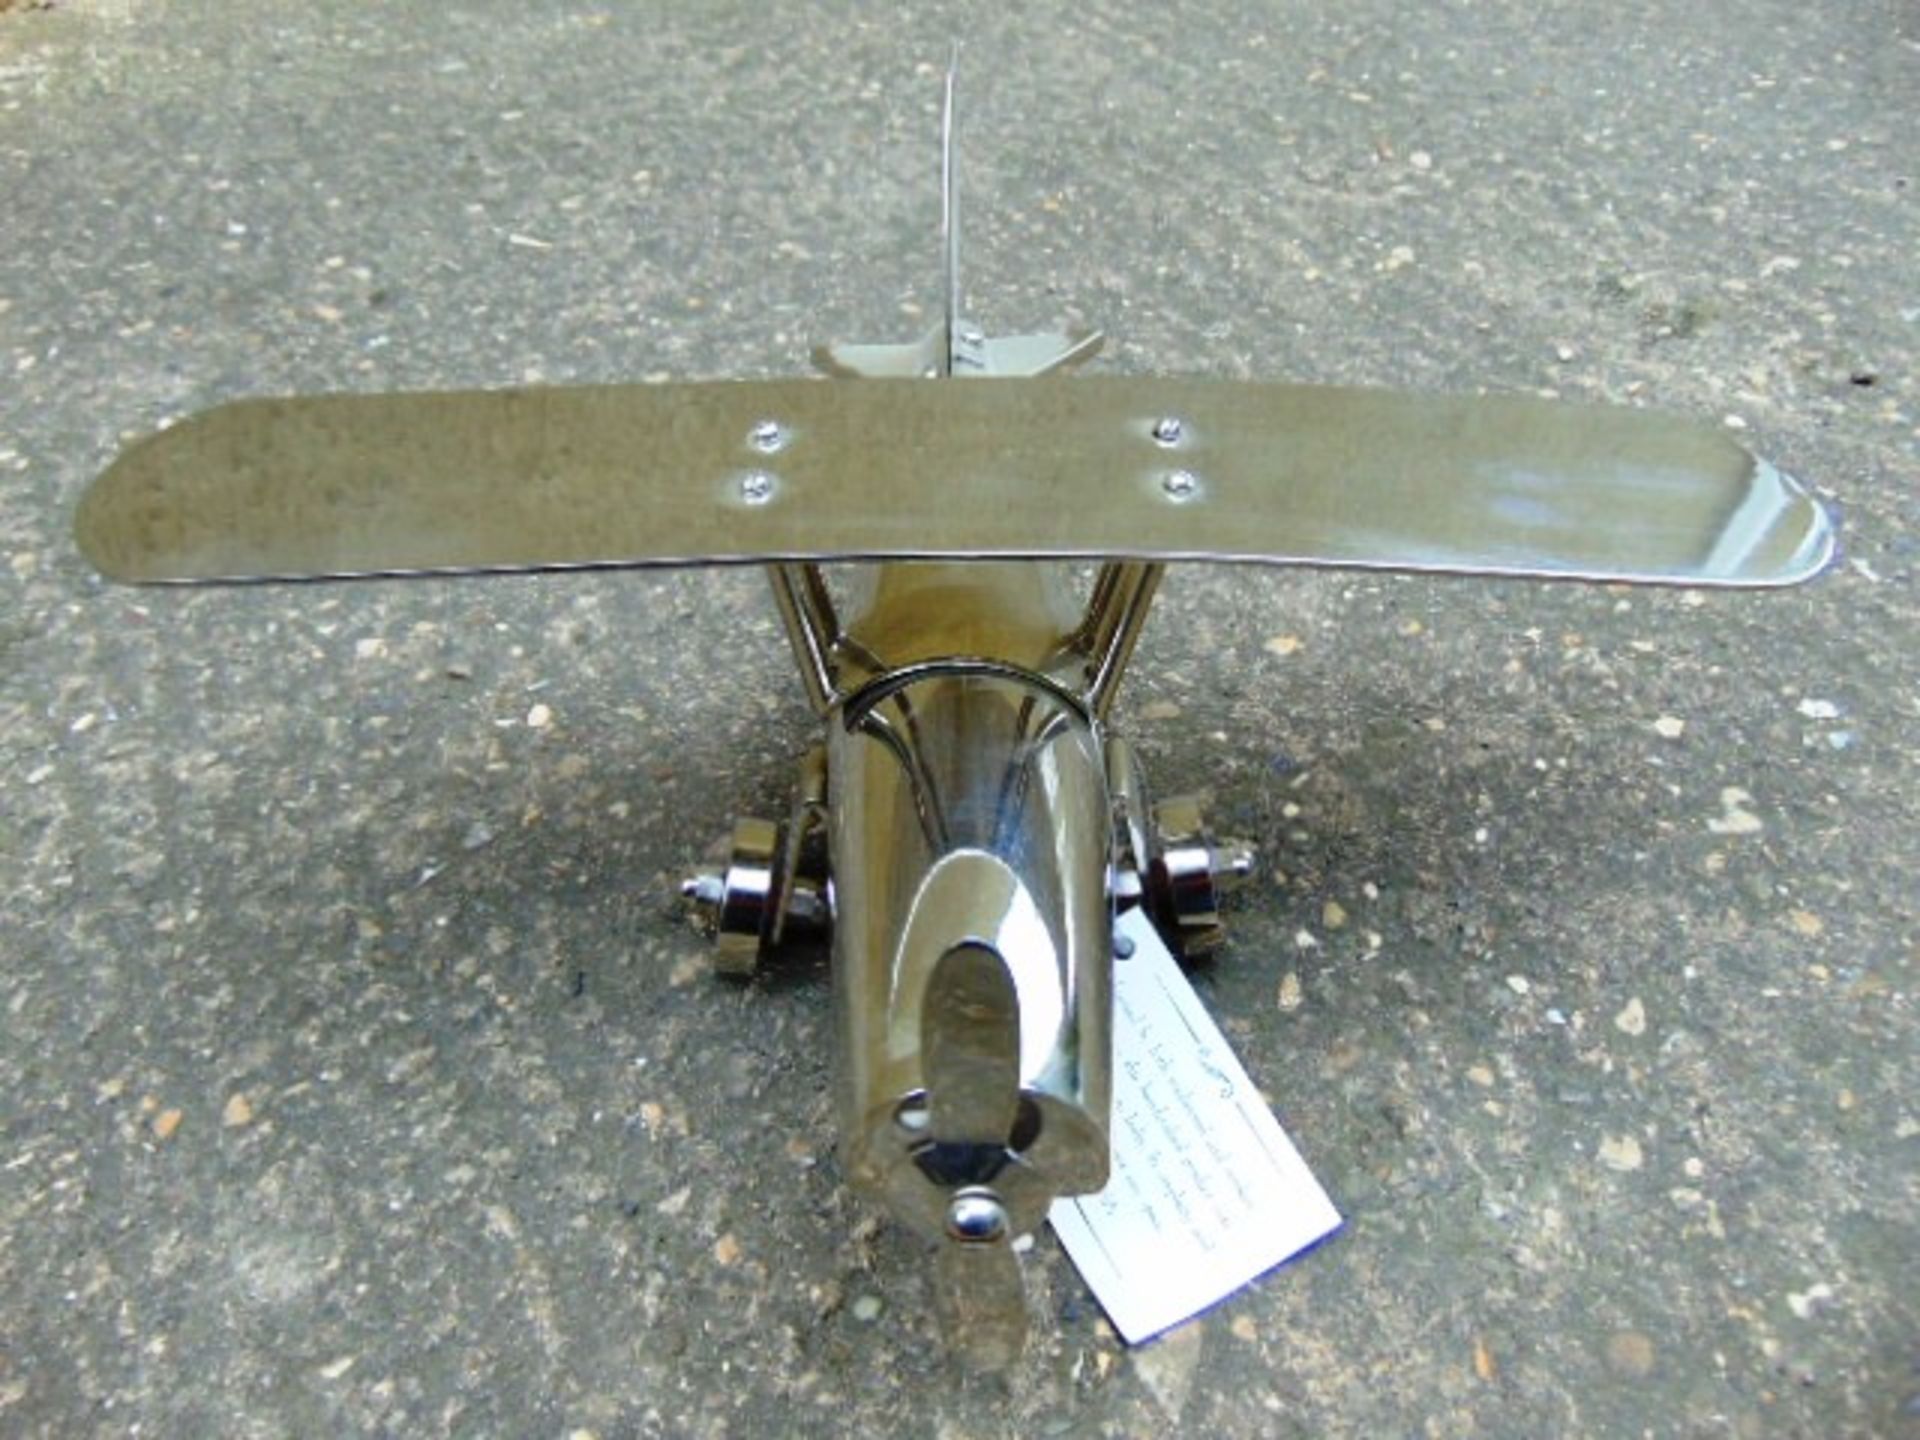 Handcrafted Desktop Traditional Airplane Model - Image 2 of 4